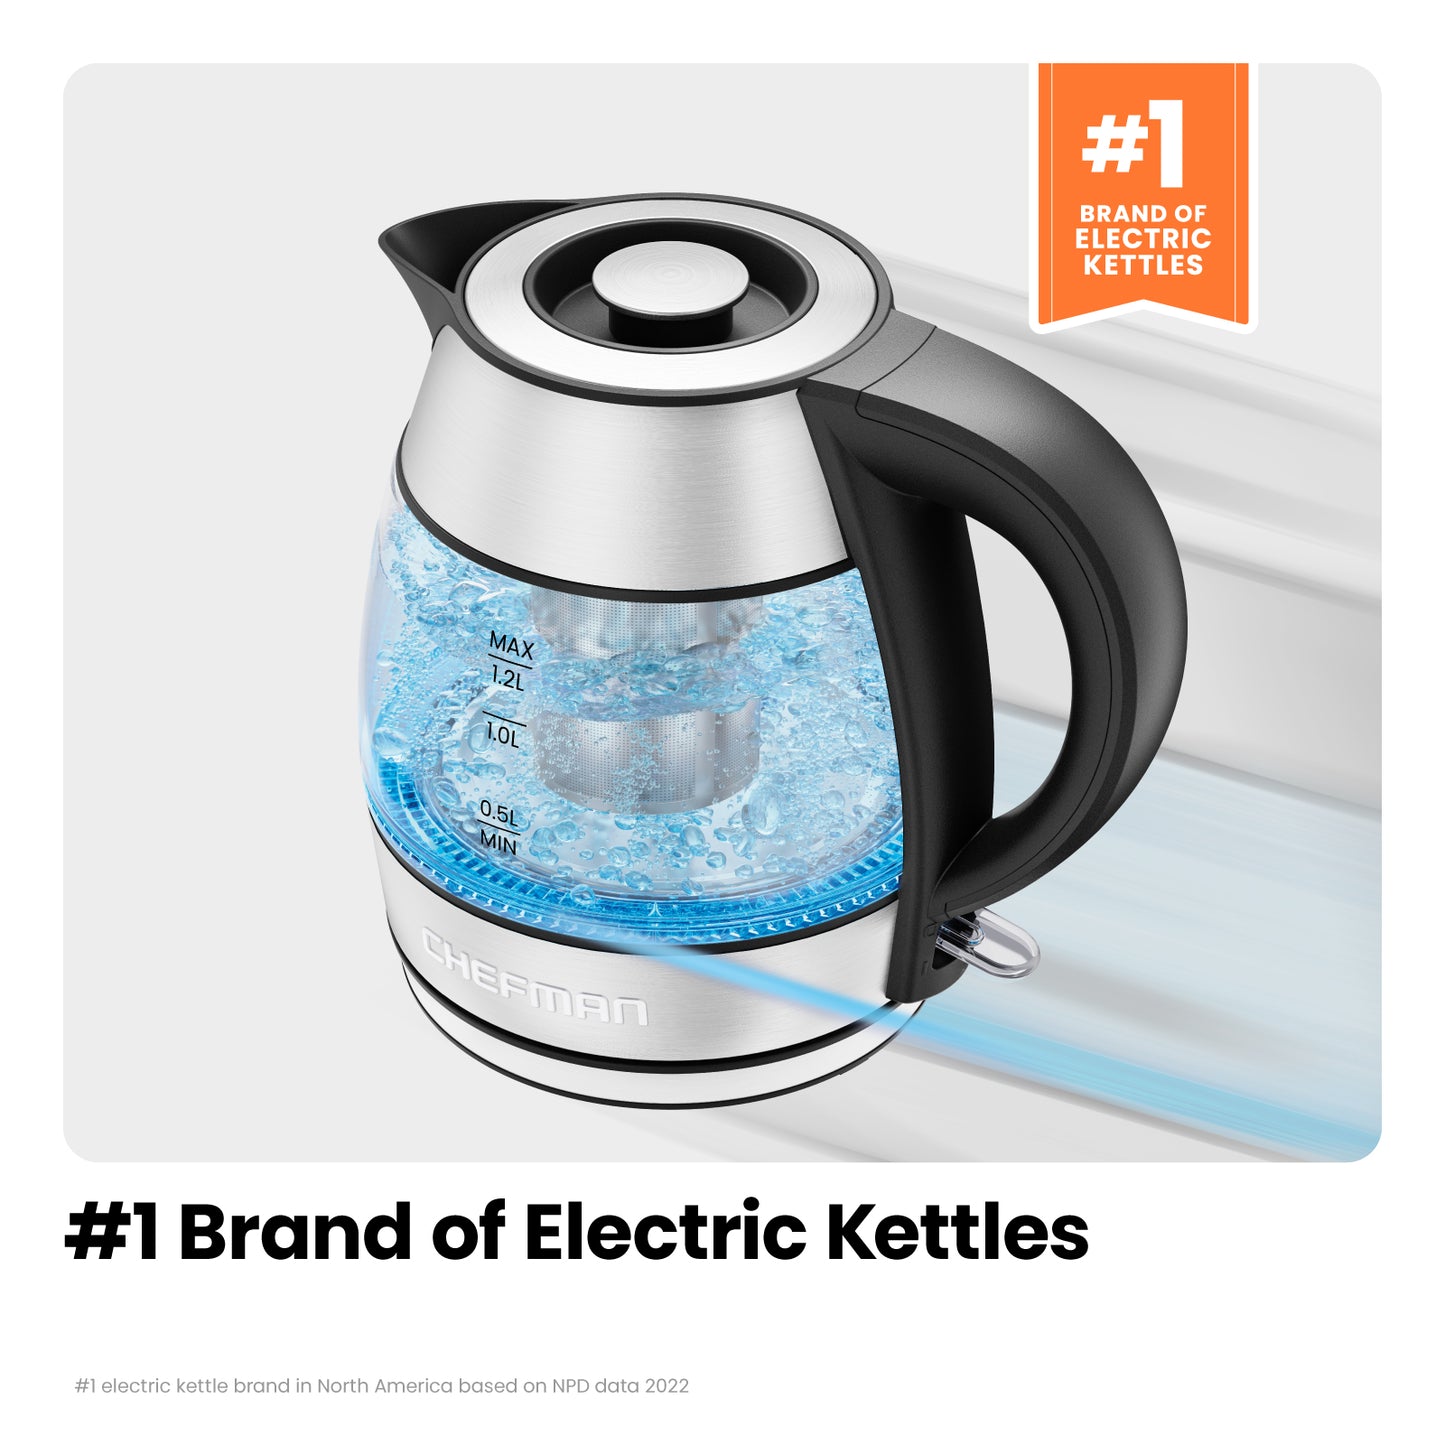 Fast-Boil 1.2L Electric Kettle with Tea Infuser